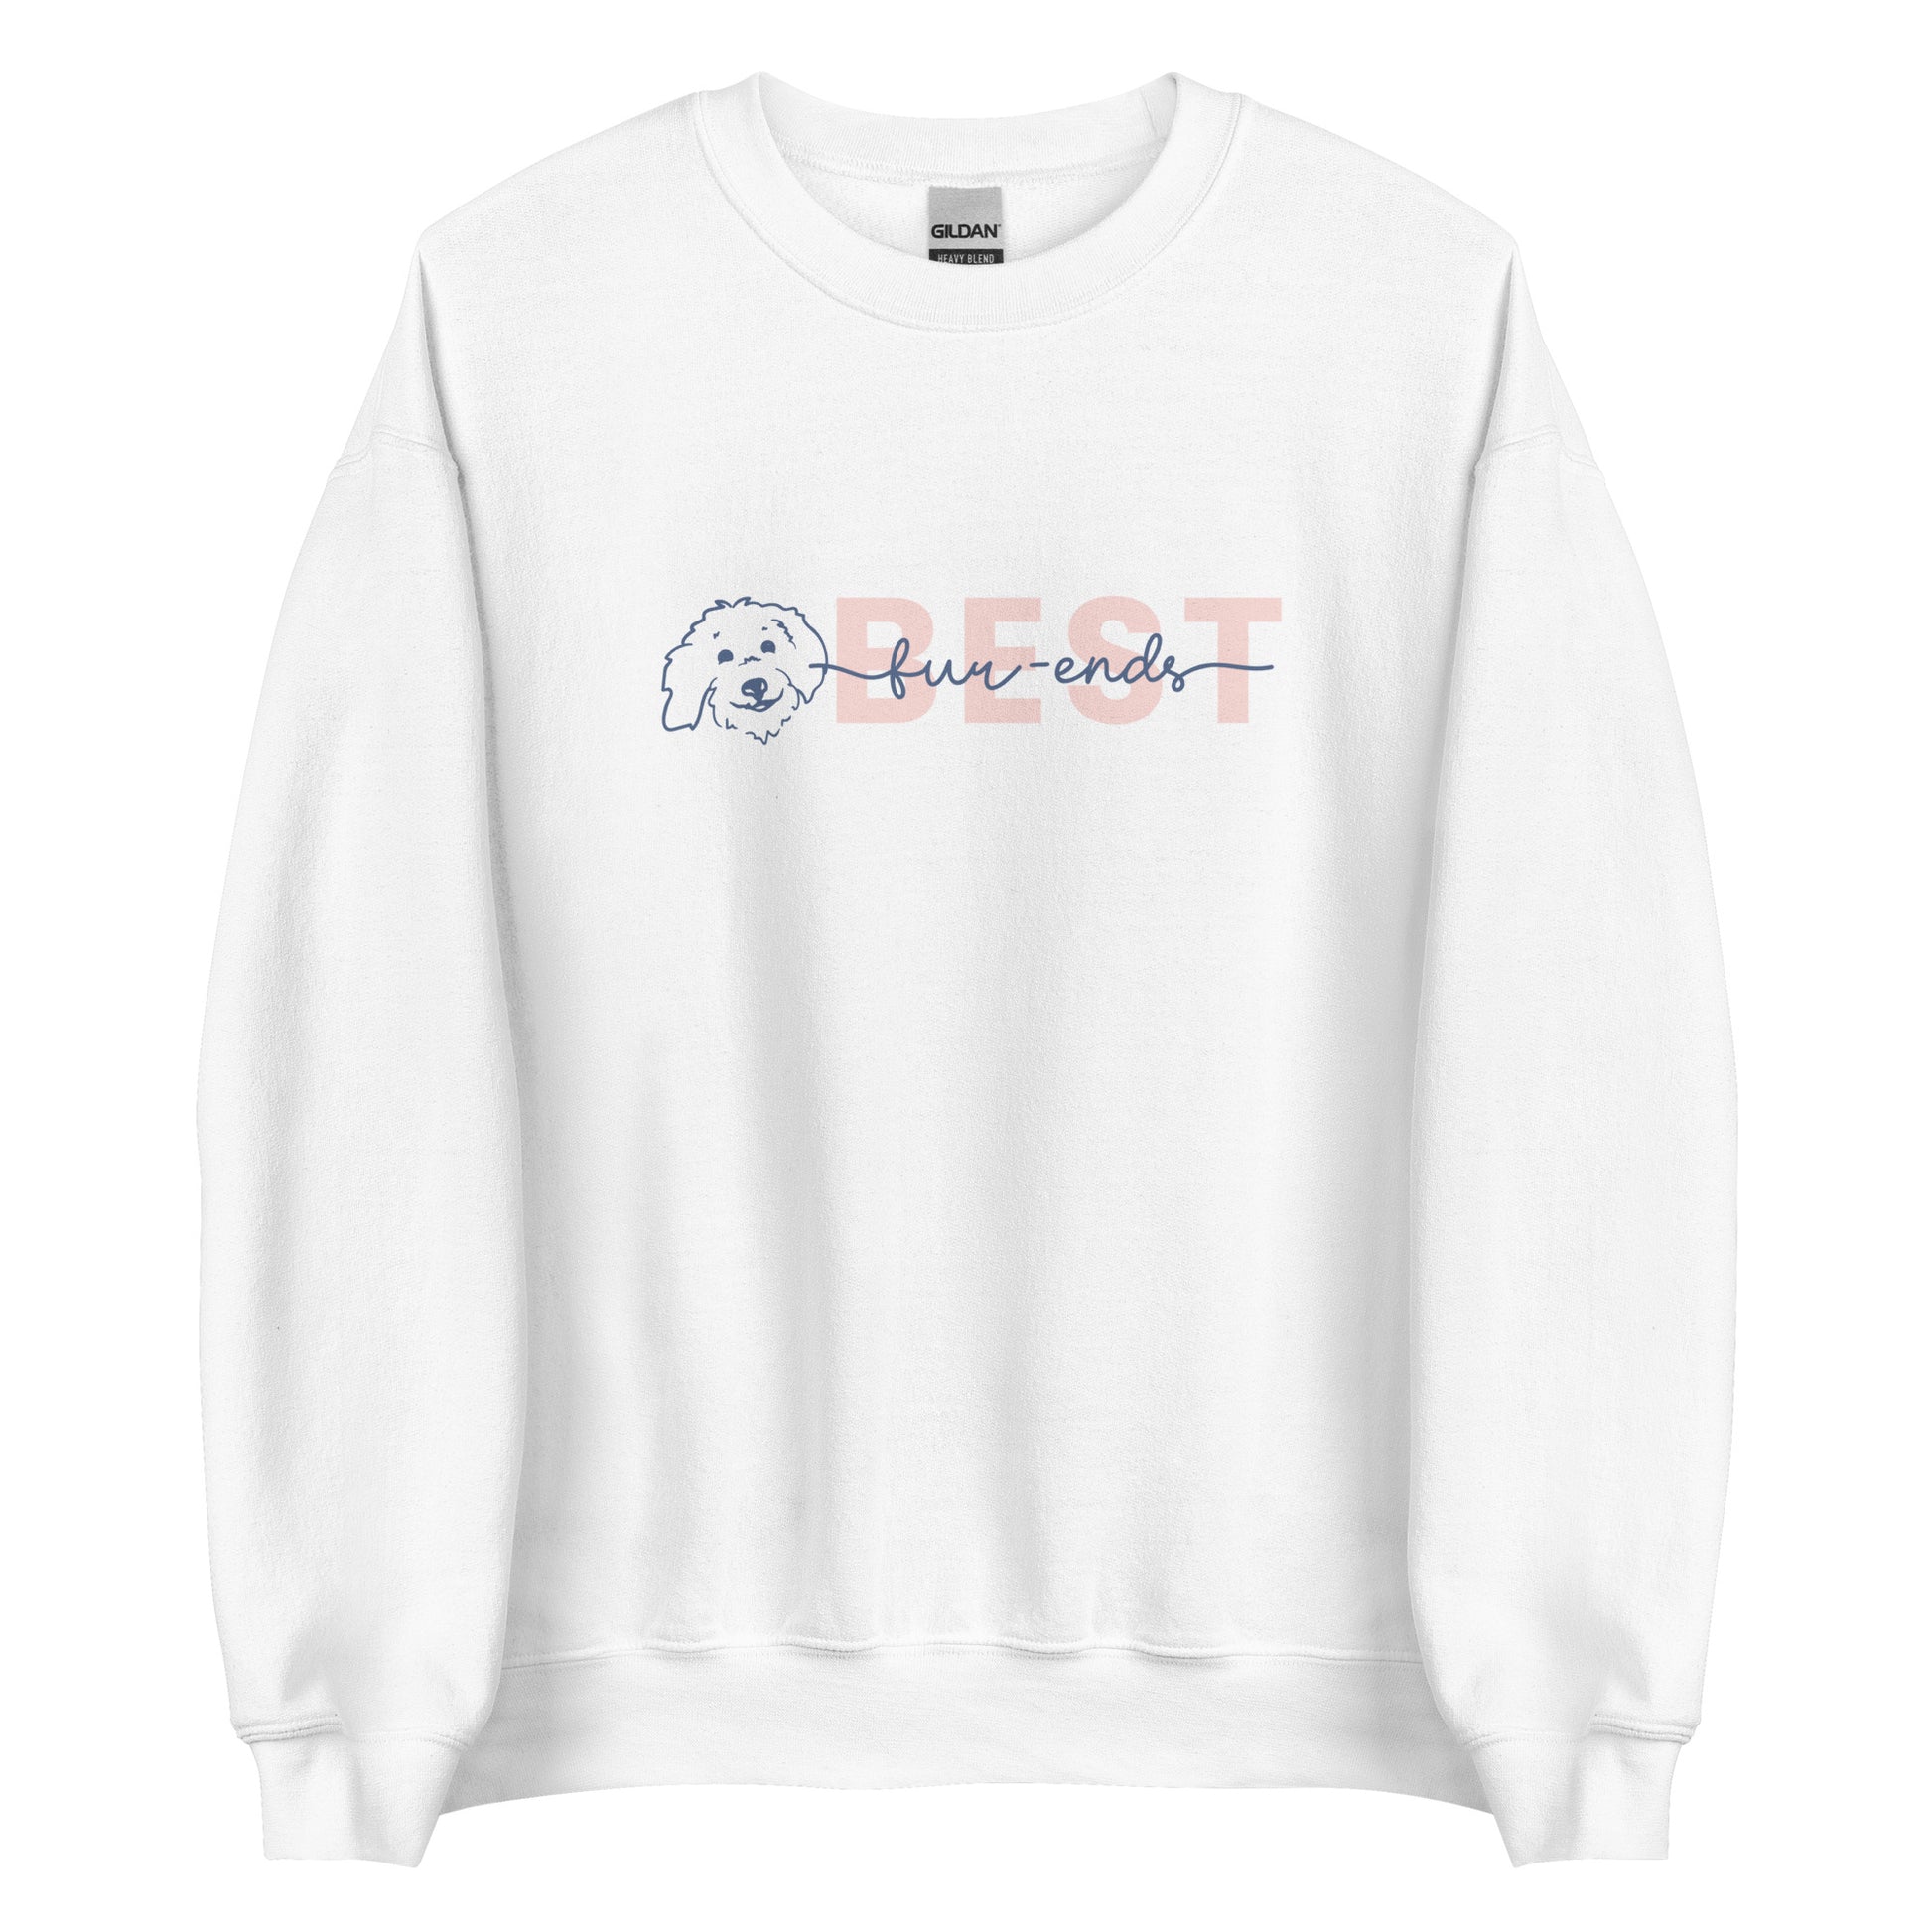 Goldendoodle crew neck sweatshirt with Goldendoodle face and words "Best fur-Ends" in white color